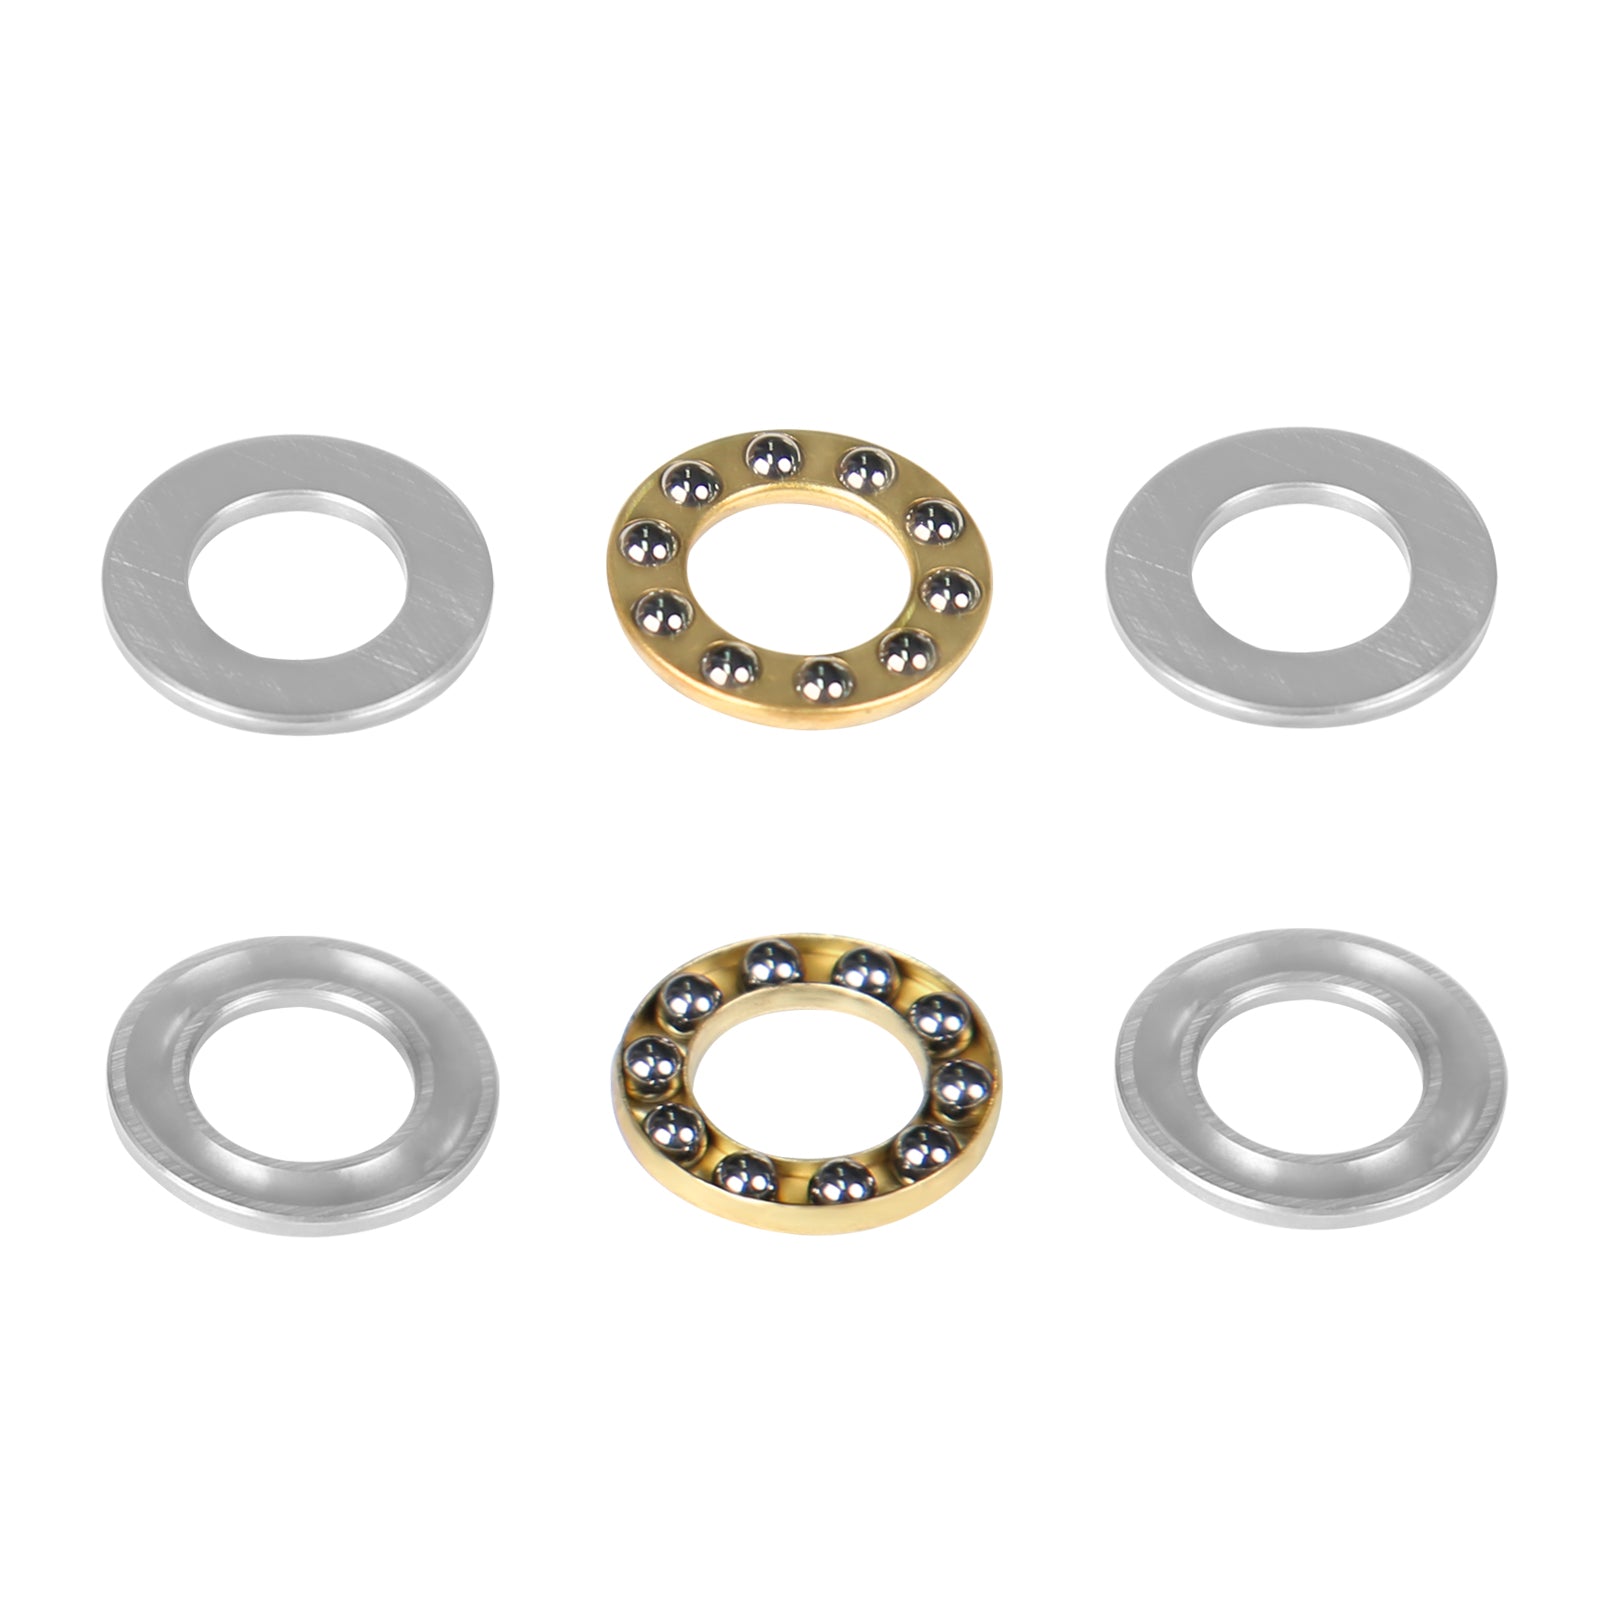 OMP HOBBY M7 Helicopter Parts Axial Bearing _10x_18x5.5 OSHM7157